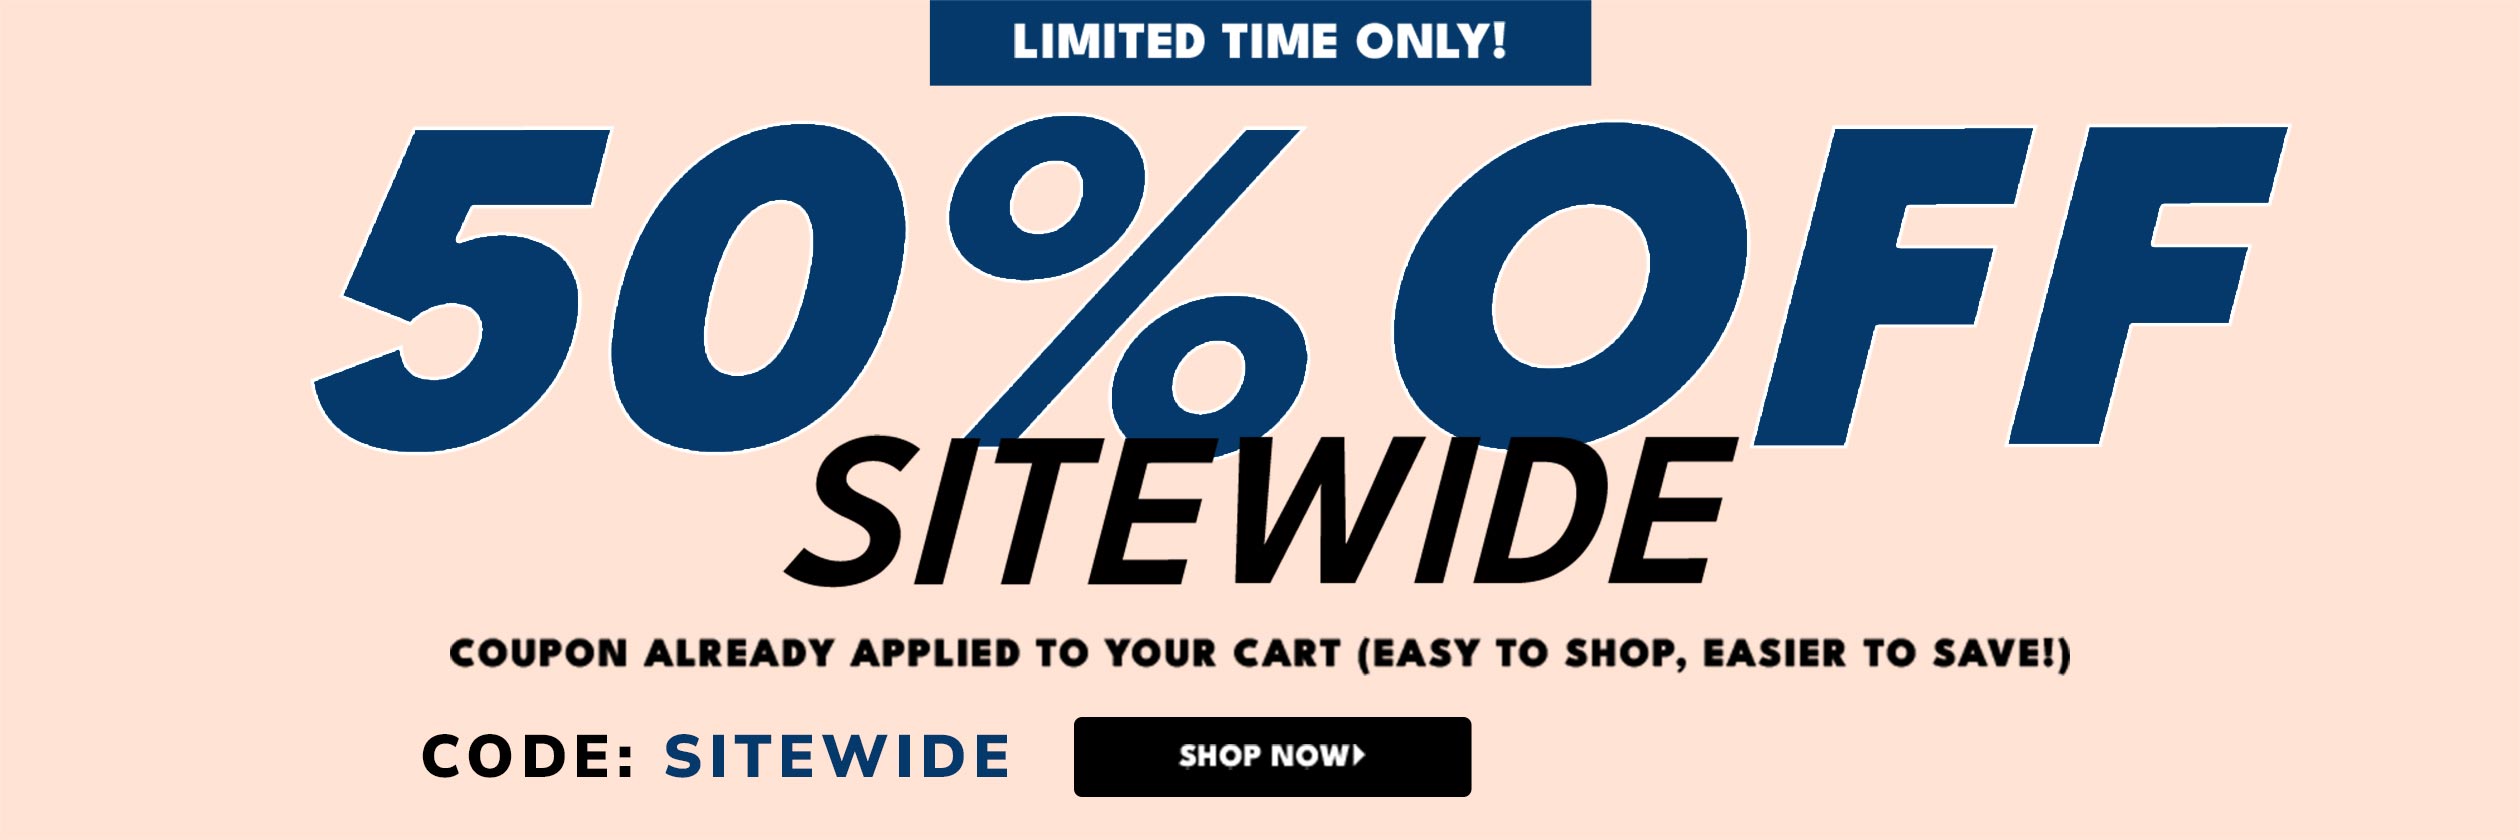 50% off sitewide code: SITEWIDE